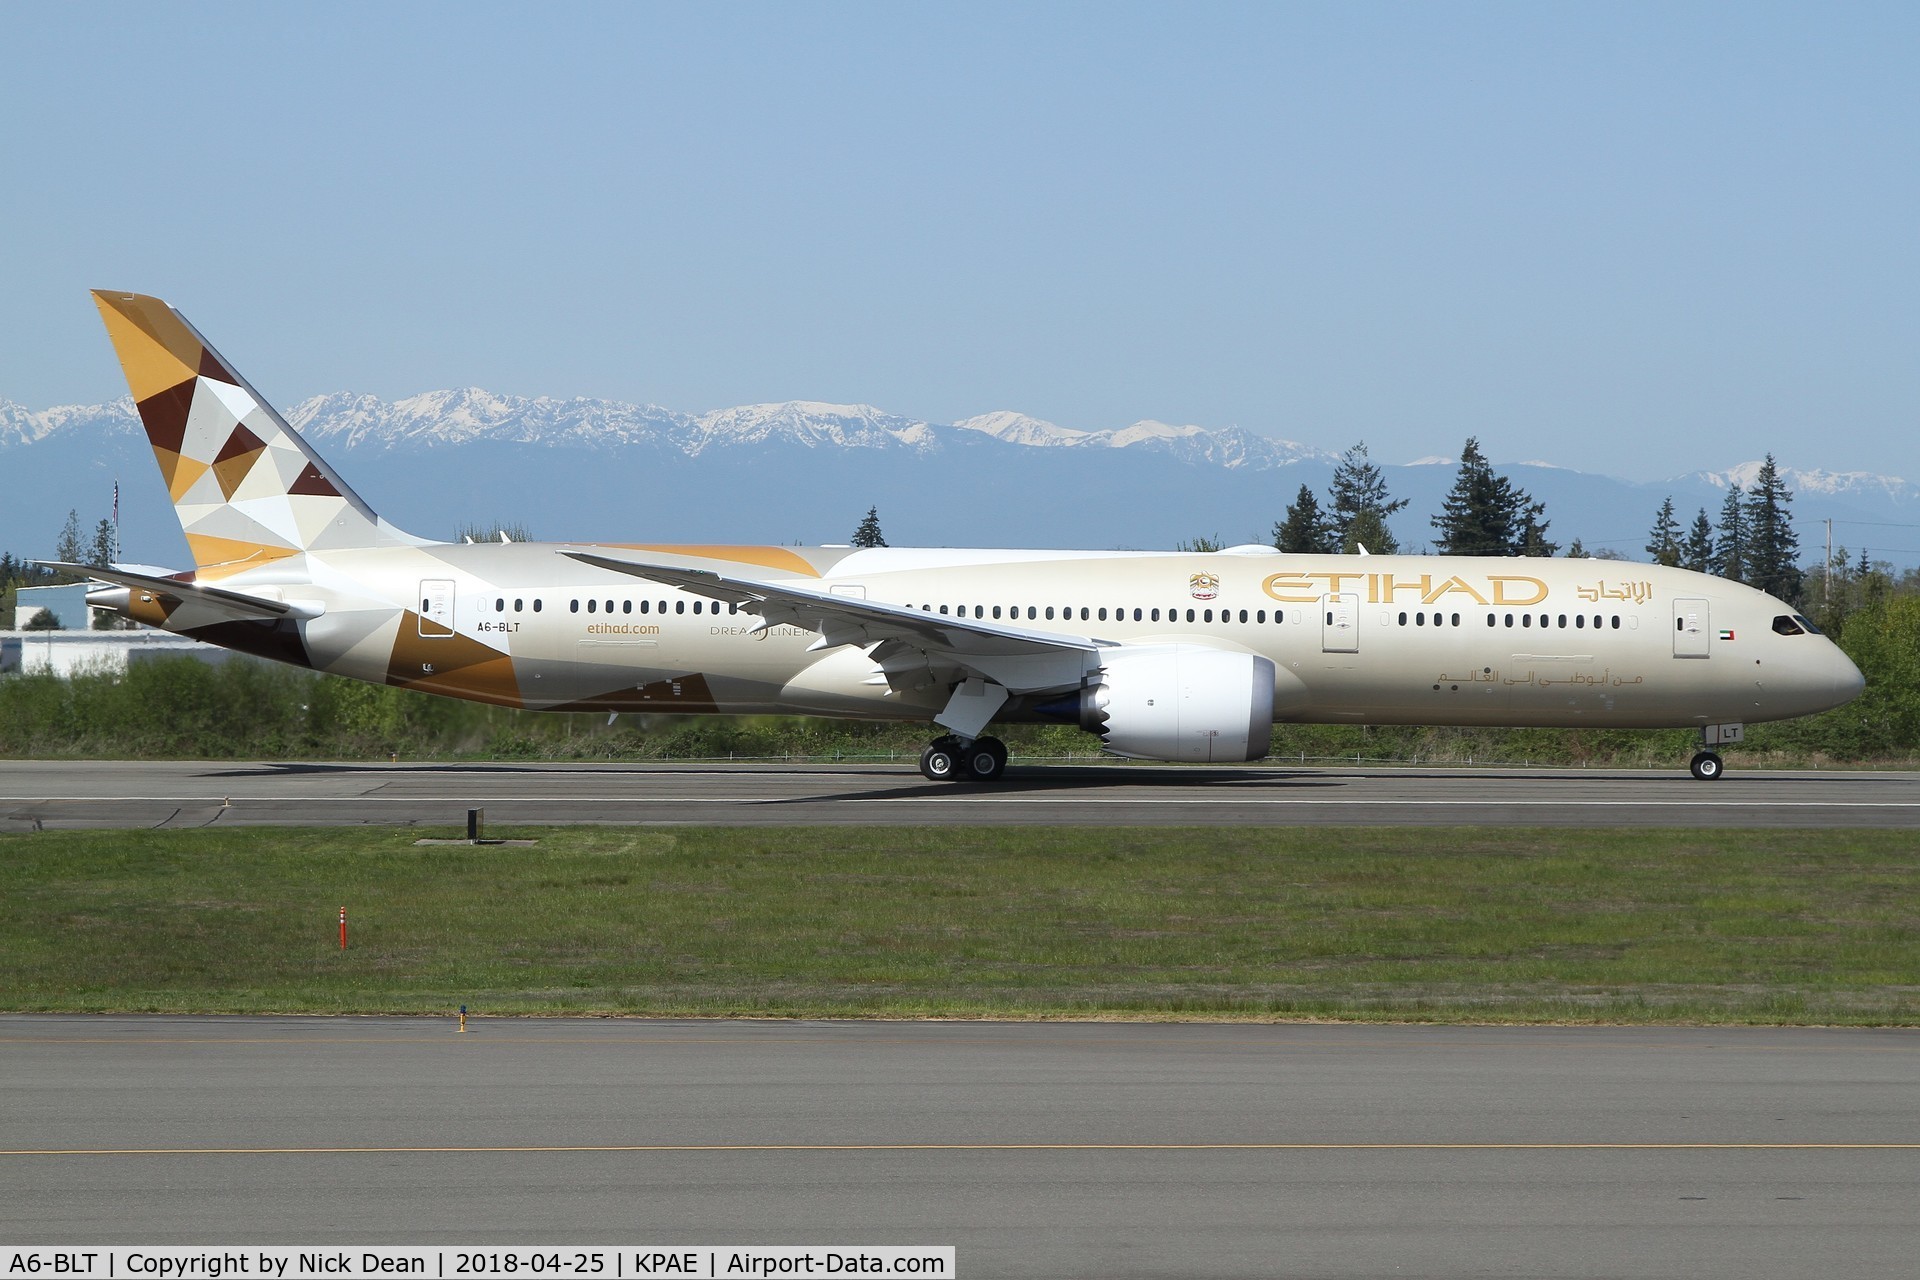 A6-BLT, 2018 Boeing 787-9 Dreamliner C/N 39667, Etihad 9901 departing on delivery this morning